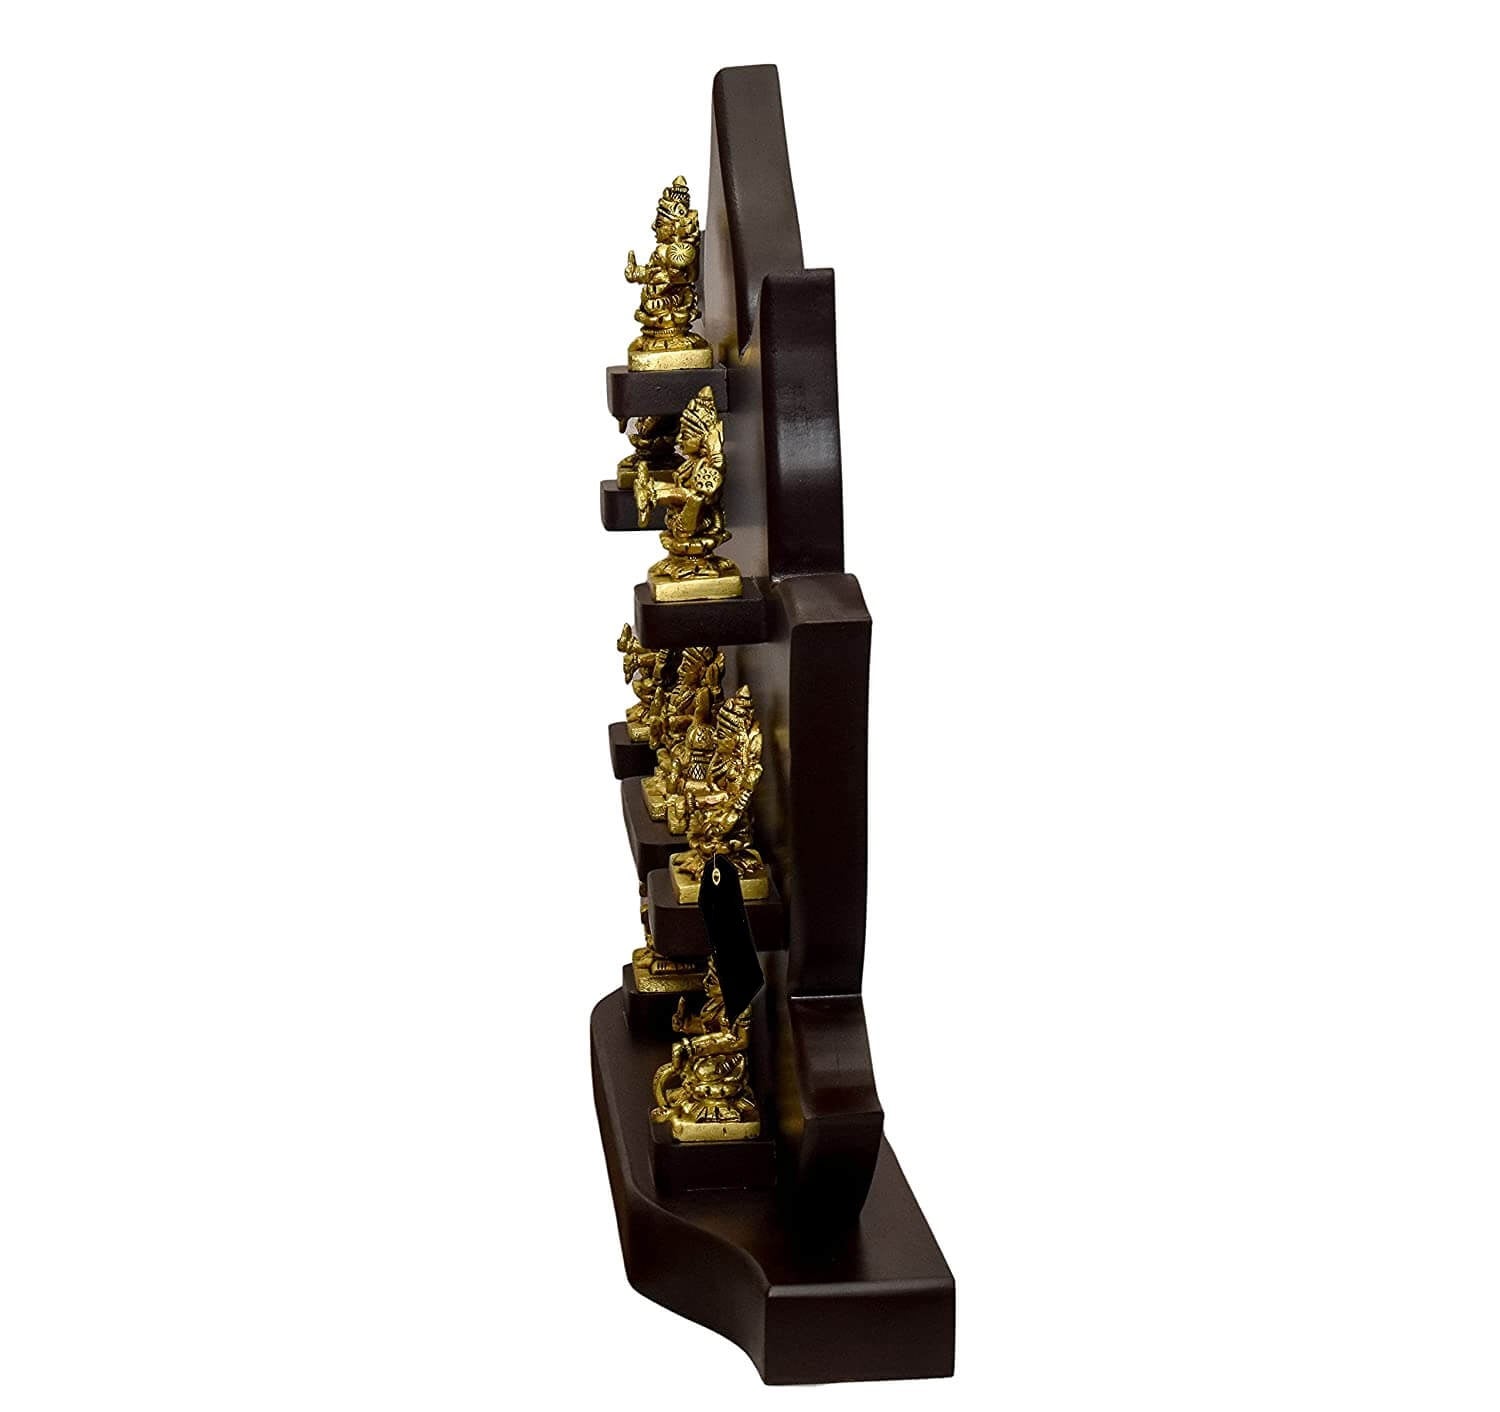 Goddess Ashtalakshmi Set with Wooden Table Frame for Pooja Mandir Temple Decor - (Height: Idol: 2 Inches; Frame: 13.75 x 14 x 3 Inches) Mangal Fashions | Indian Home Decor and Craft